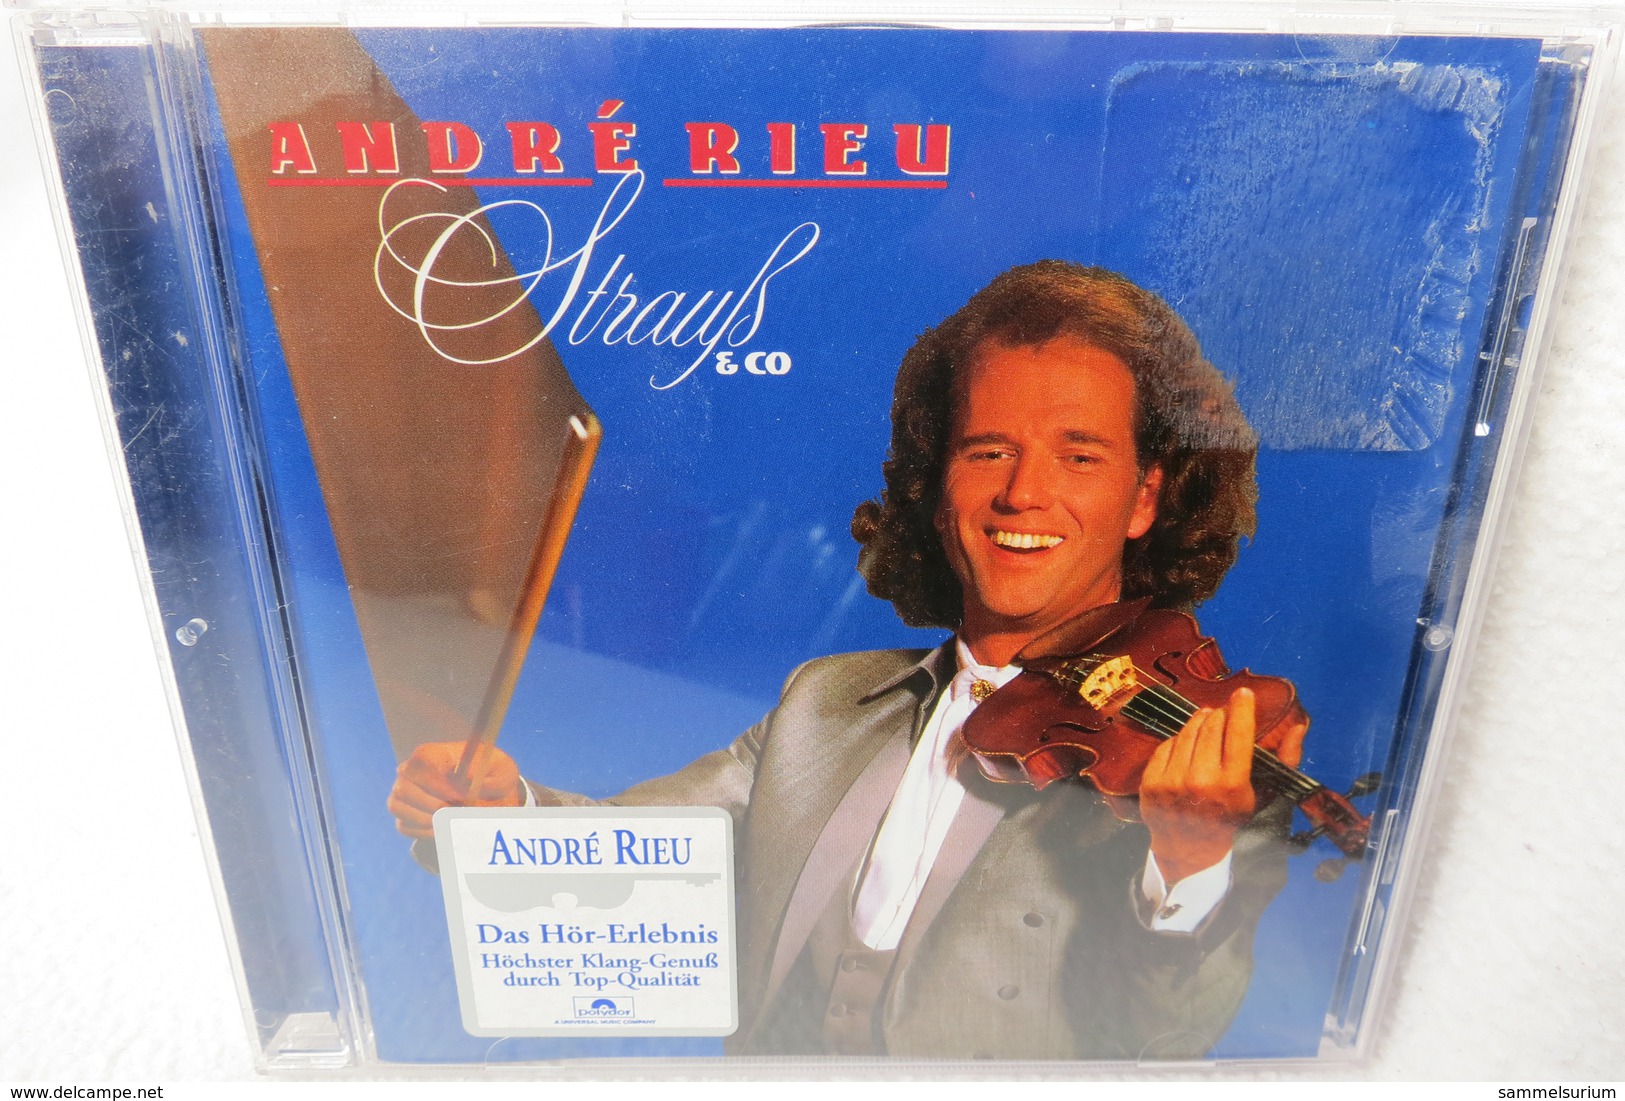 CD "André Rieu" Strauß & Co. - Instrumentaal